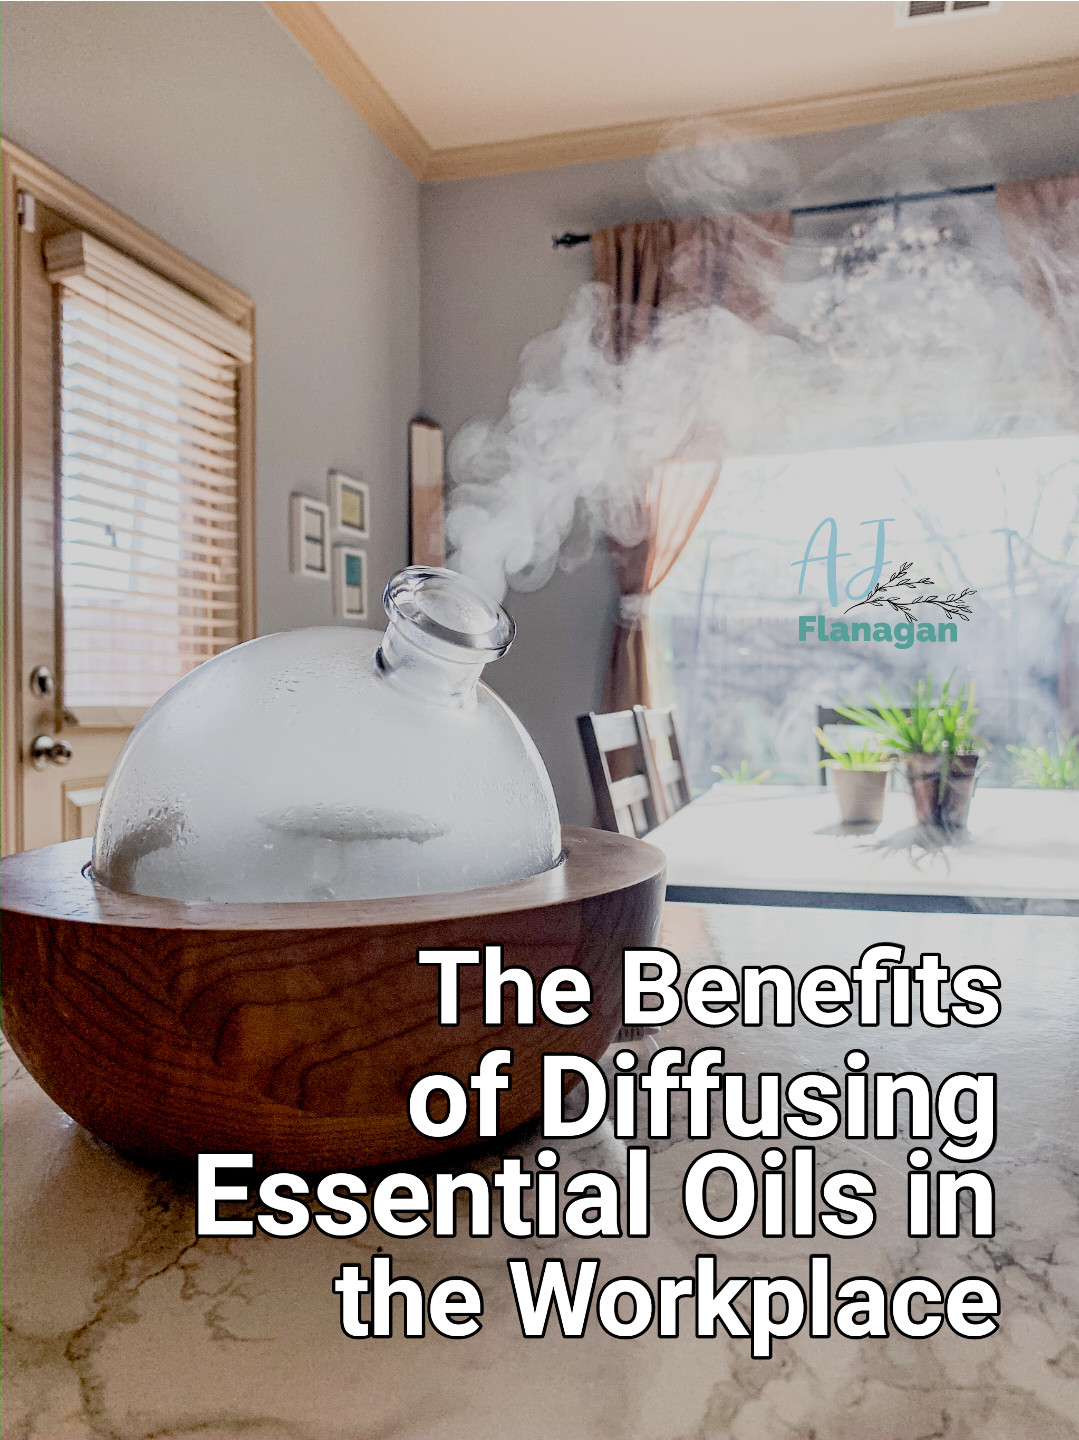 The Benefits of Diffusing Essential Oils in the Workplace